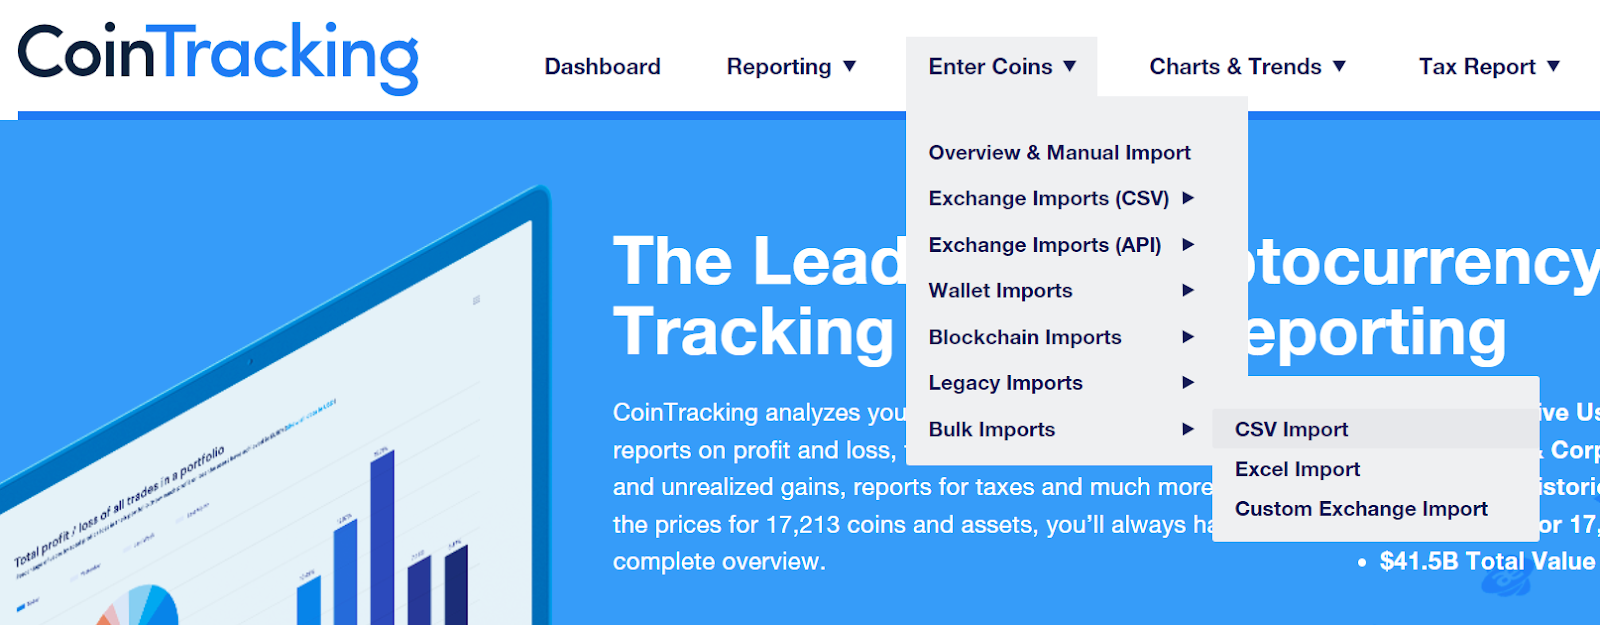 CoinTracking_CSV_import_1.png